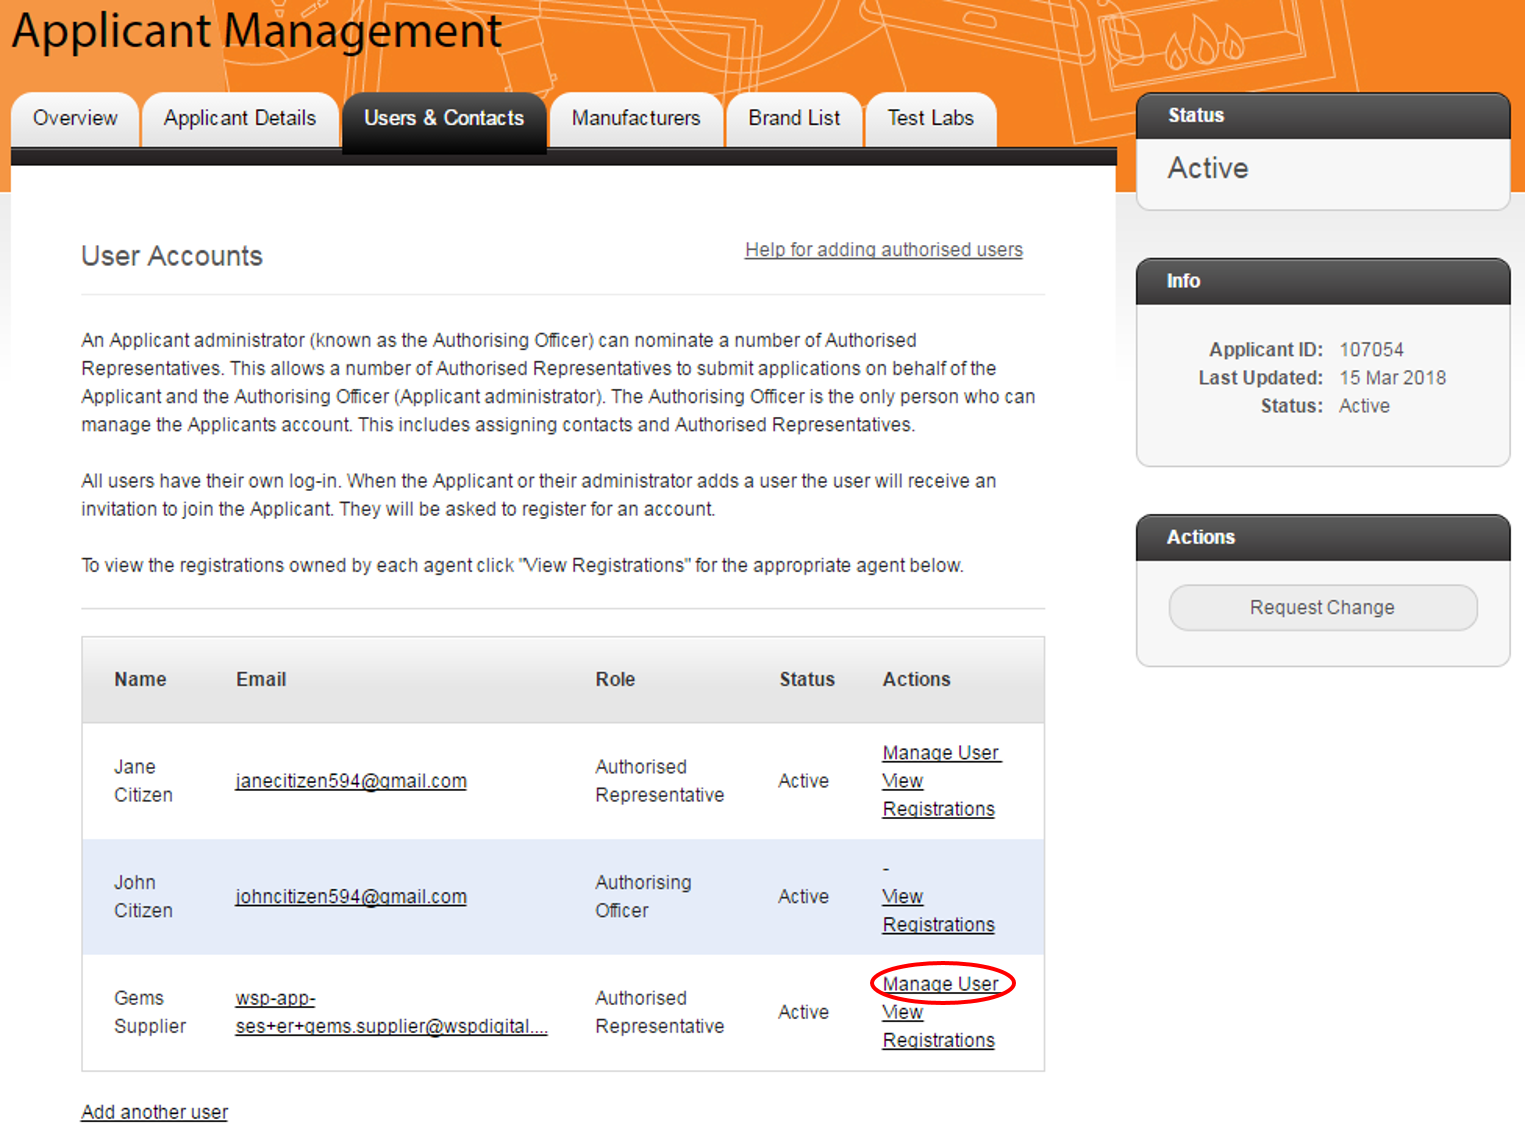 Screenshot of the "Invite User to join Applicant" page with one of the listed users' "Manage User" link highlighted